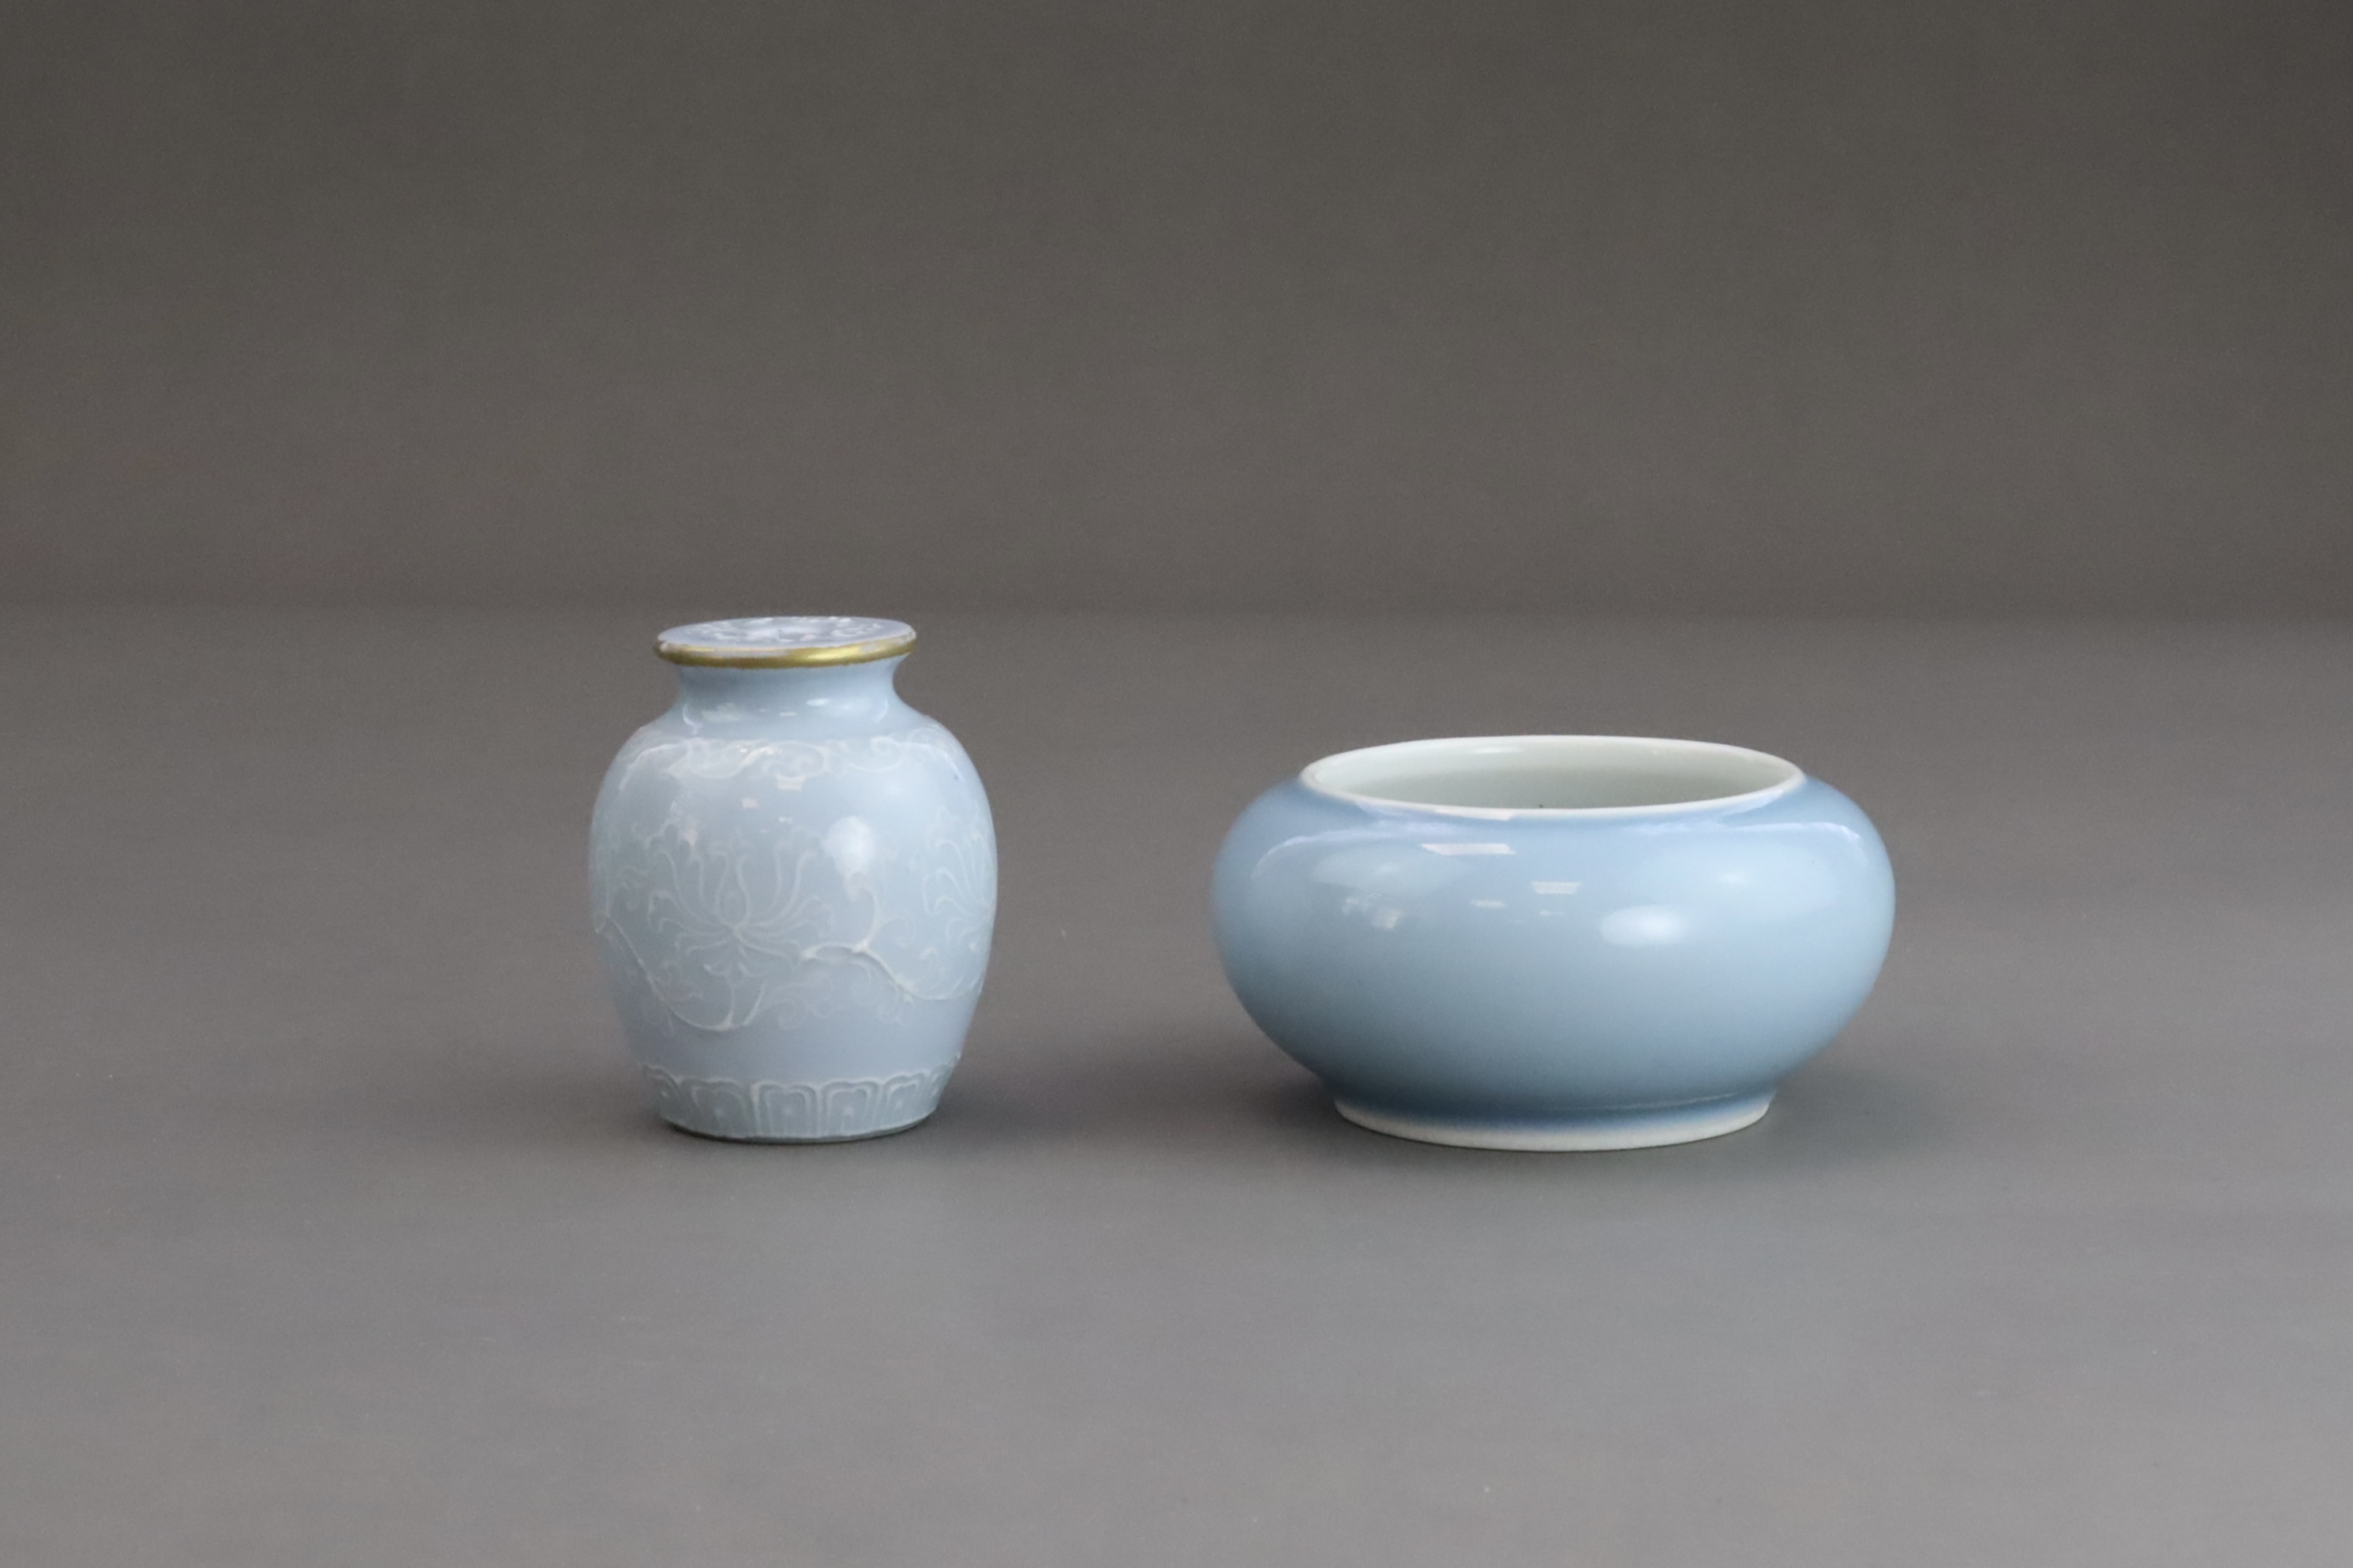  'Clair de lune': A Brushwasher, Guangxu mark and period, and a Moulded small Jar, Qing dynasty - Bild 3 aus 7